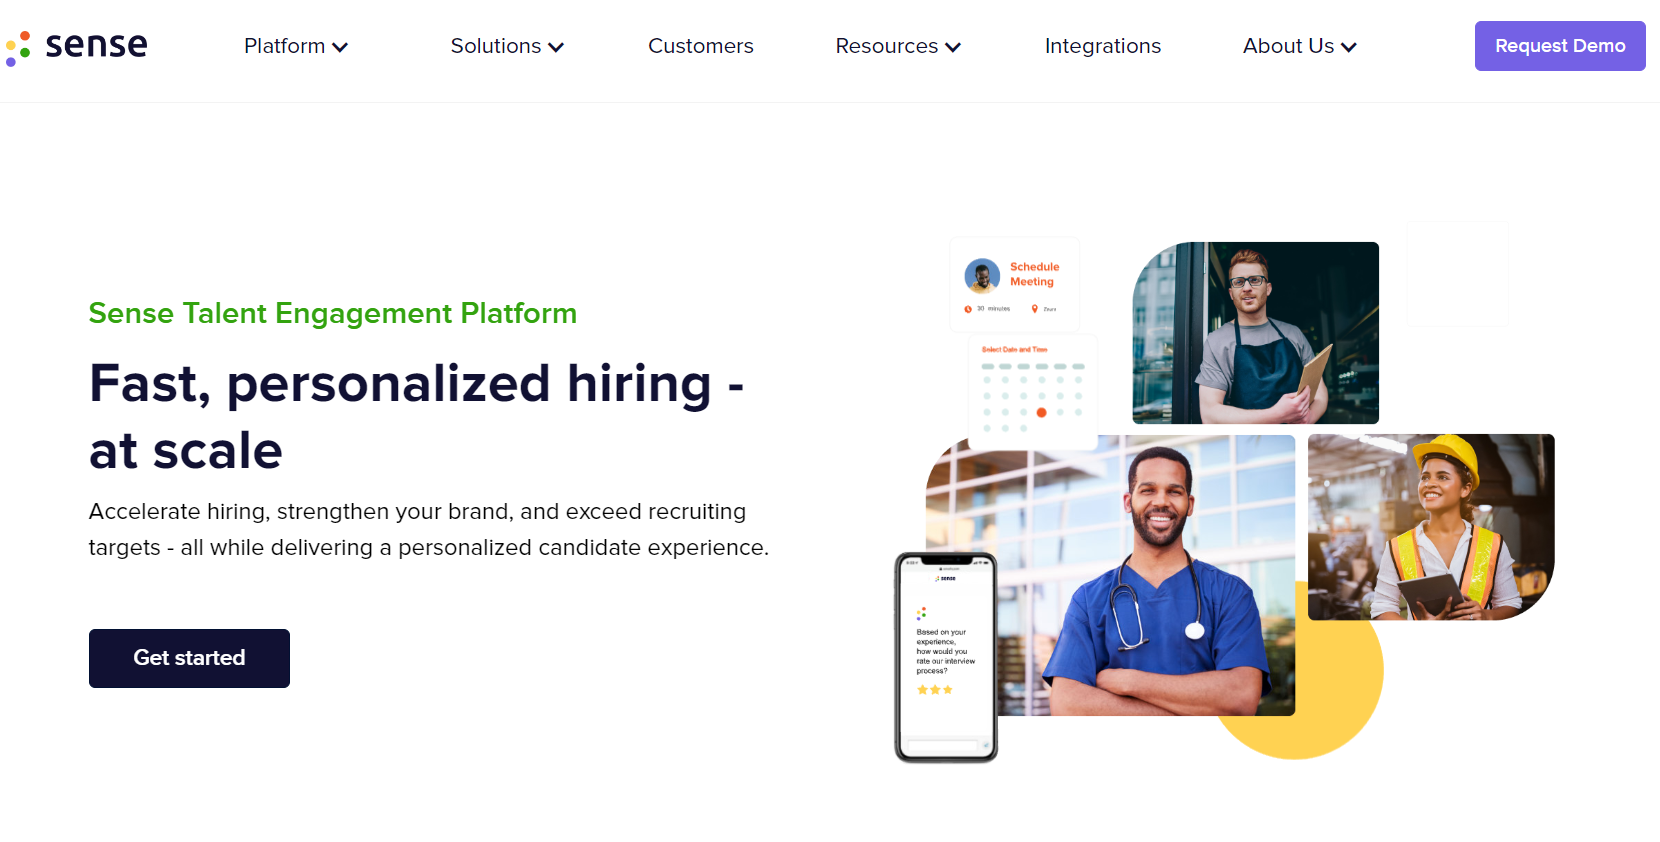 The image displays Sense's main page, which has a white background and navy blue letters. At the top right of the page, three happy individuals smile, accompanied by a schedule that illustrates the tool's process. The objective is to support fast, personalized hiring at scale.